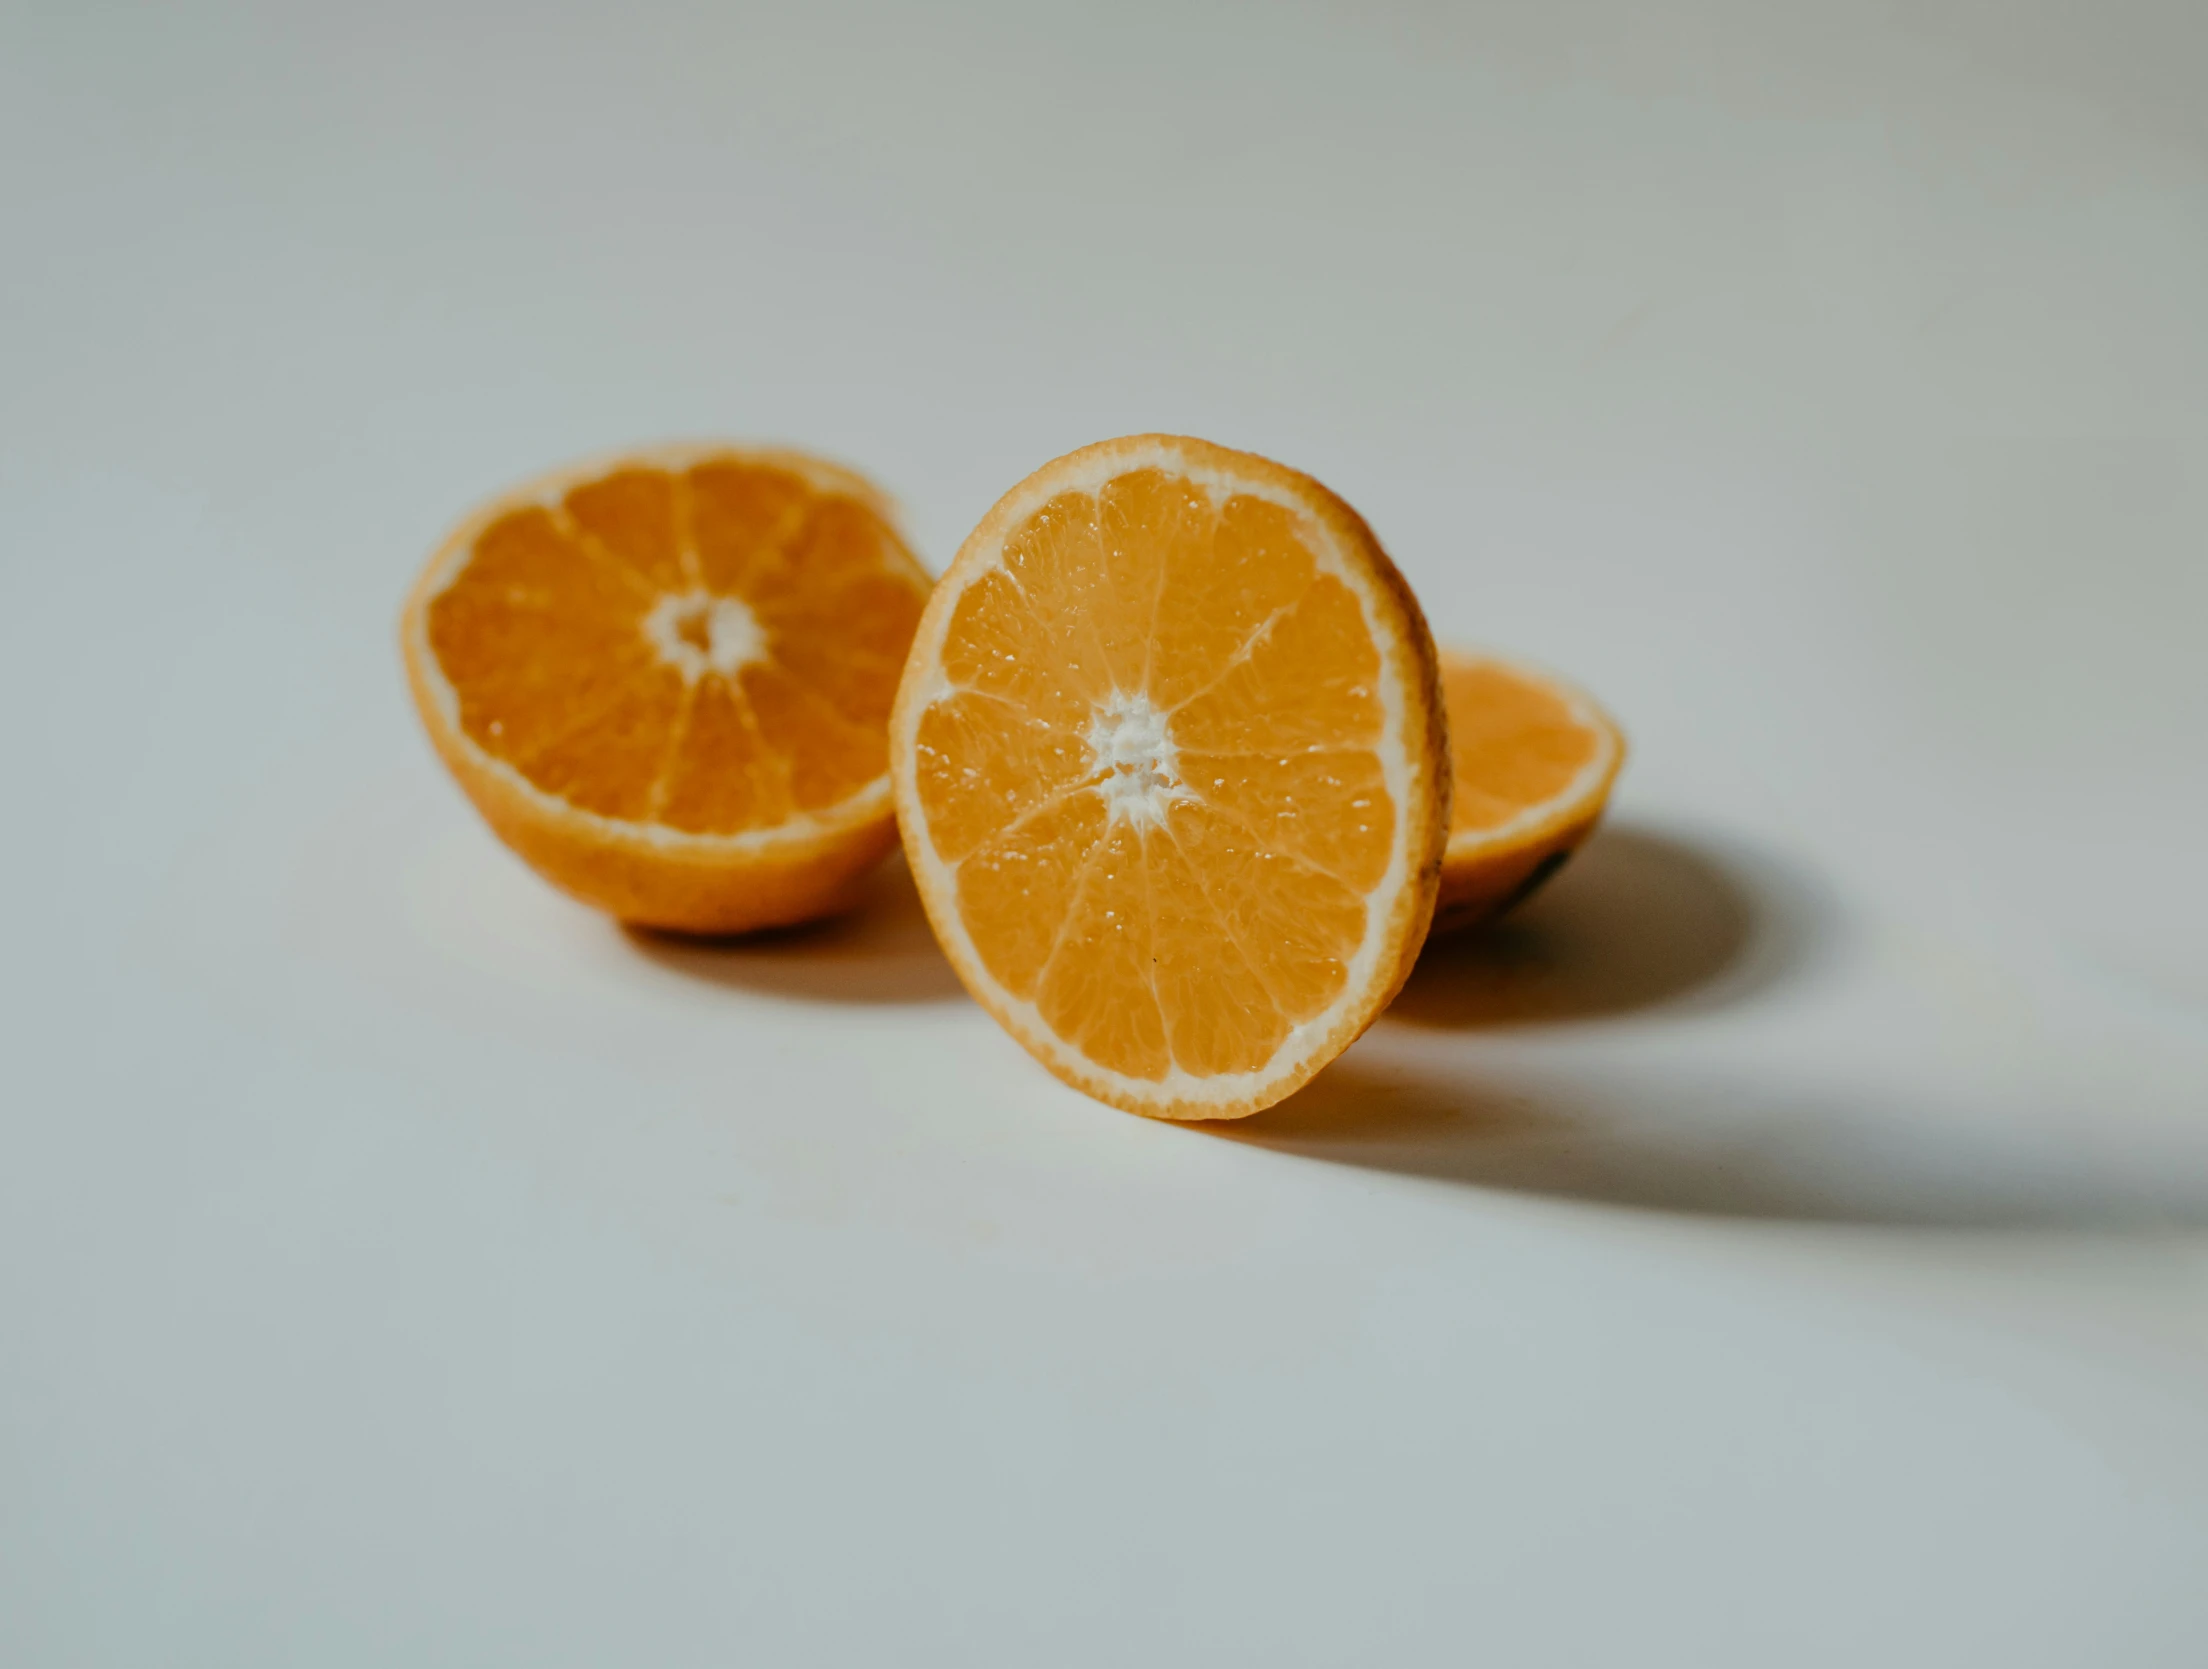 two halves of orange cut in half laying on a white table